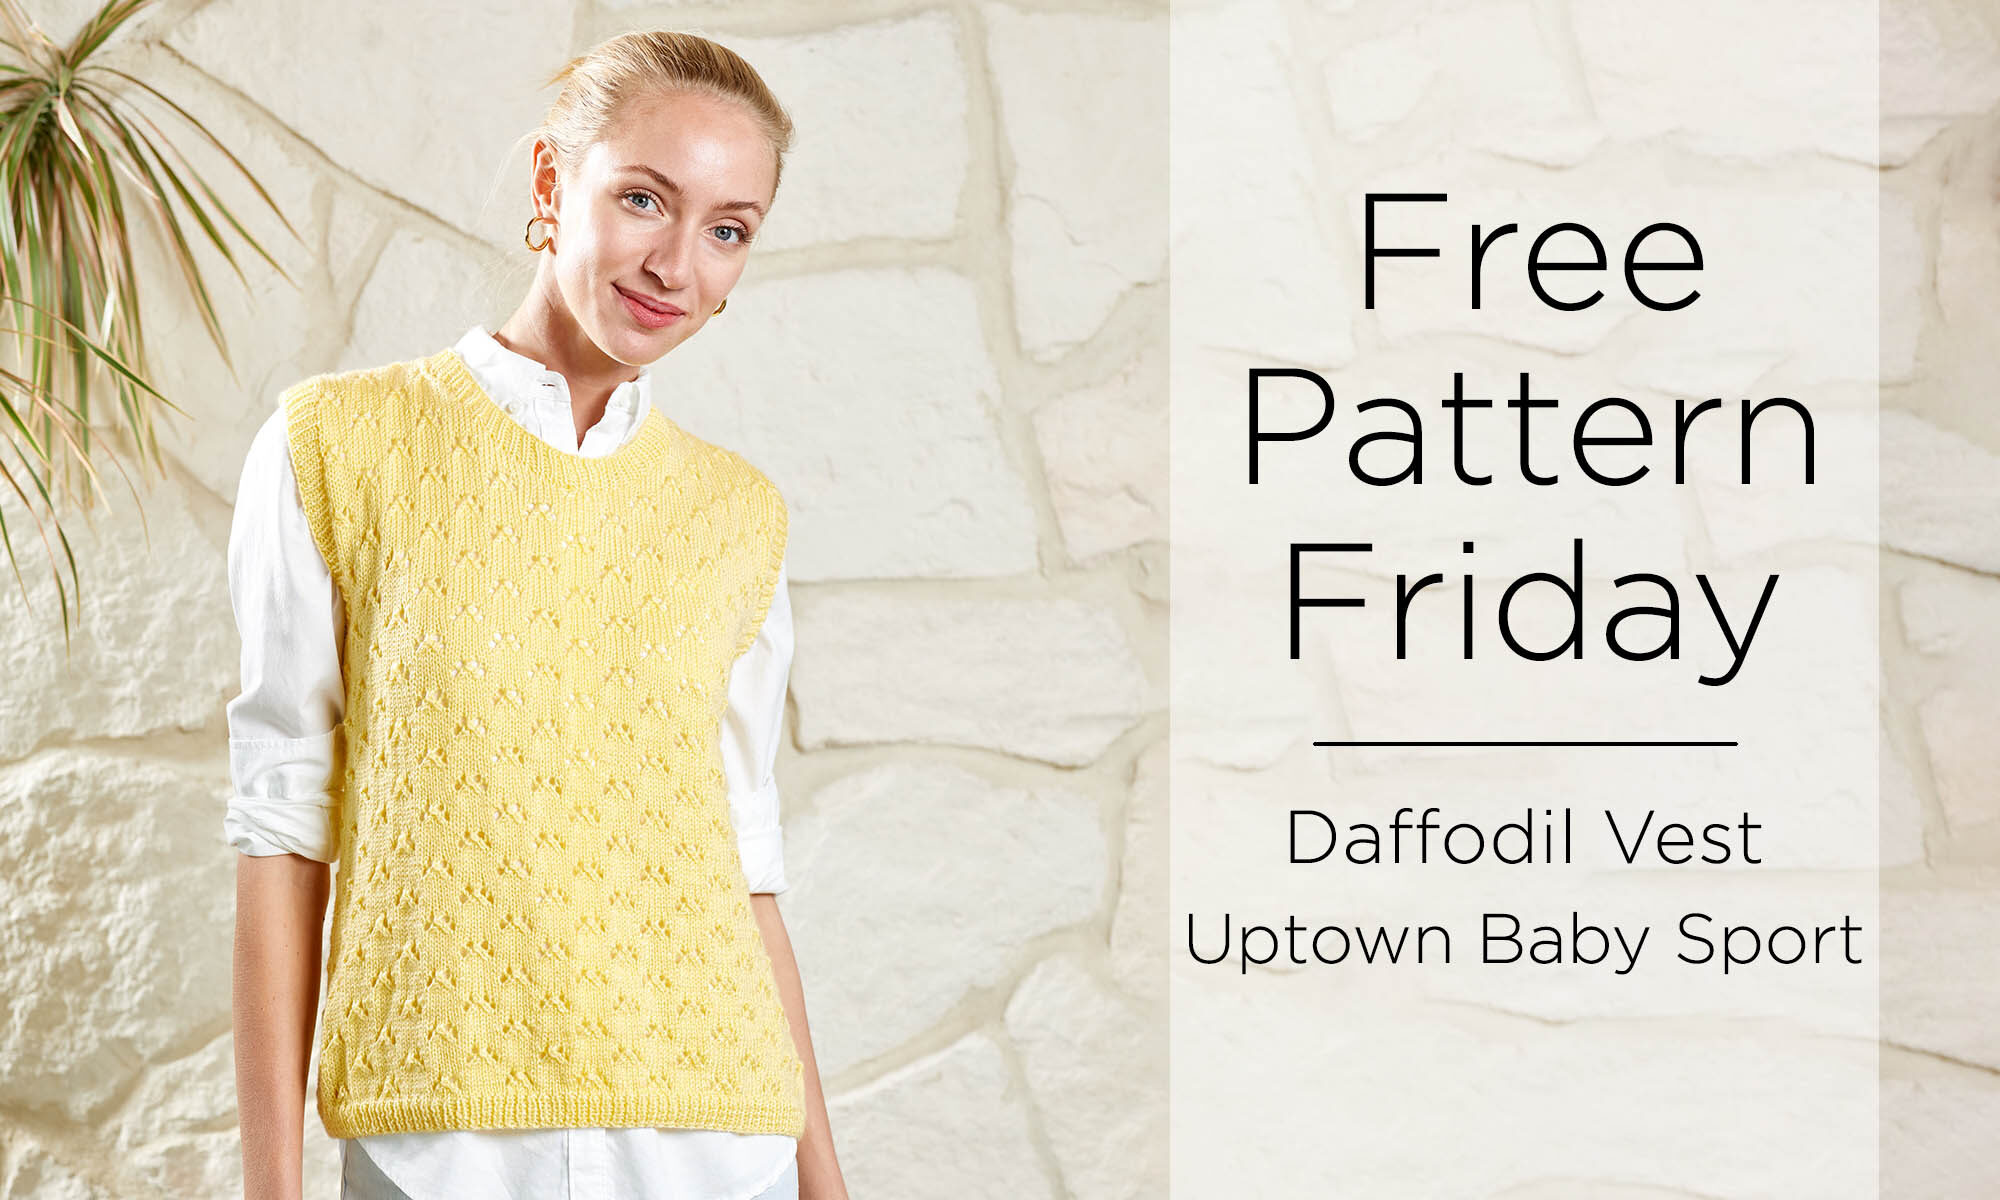 Smiling blonde woman in white button down and pale yellow knitted lace top. Text reads: Free Pattern Friday, Daffodil Vest in Uptown Baby Sport